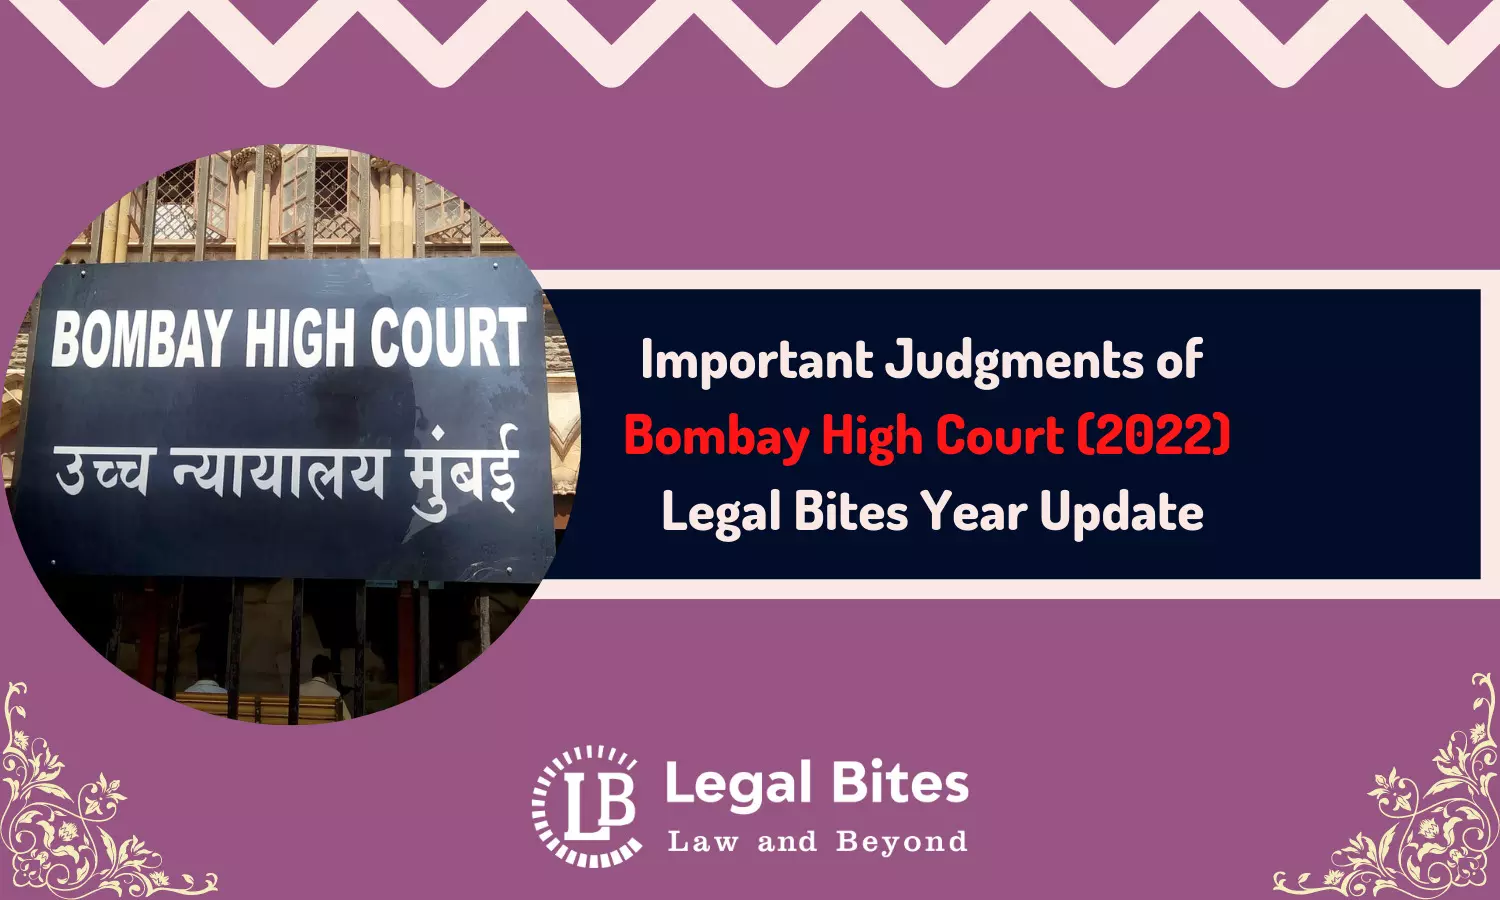 Important Judgments of Bombay High Court (2022) - Legal Bites Year Update